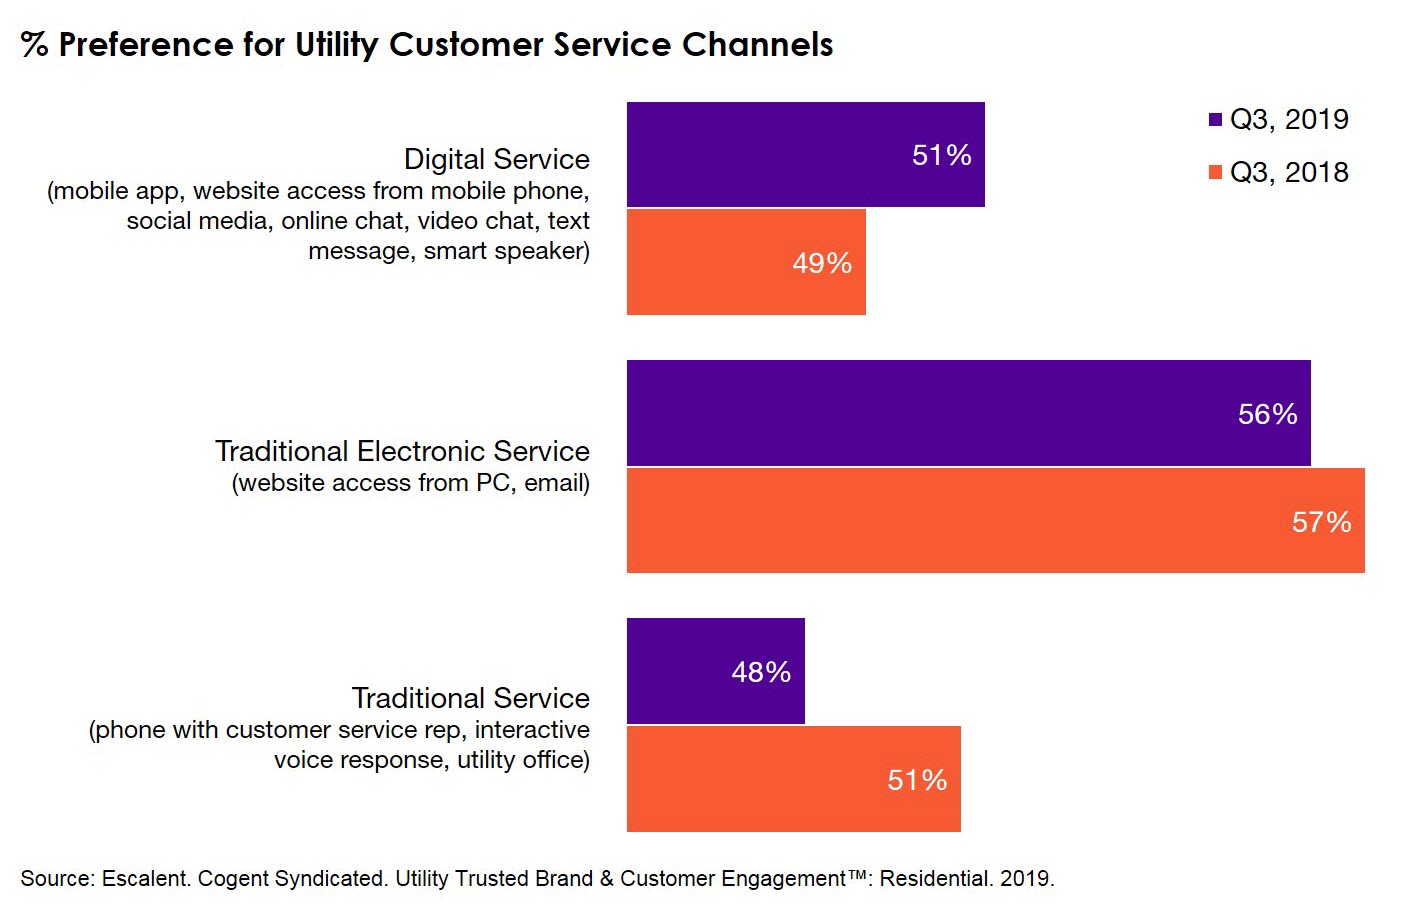 Percentage Preference for Utility Customer Service Channels